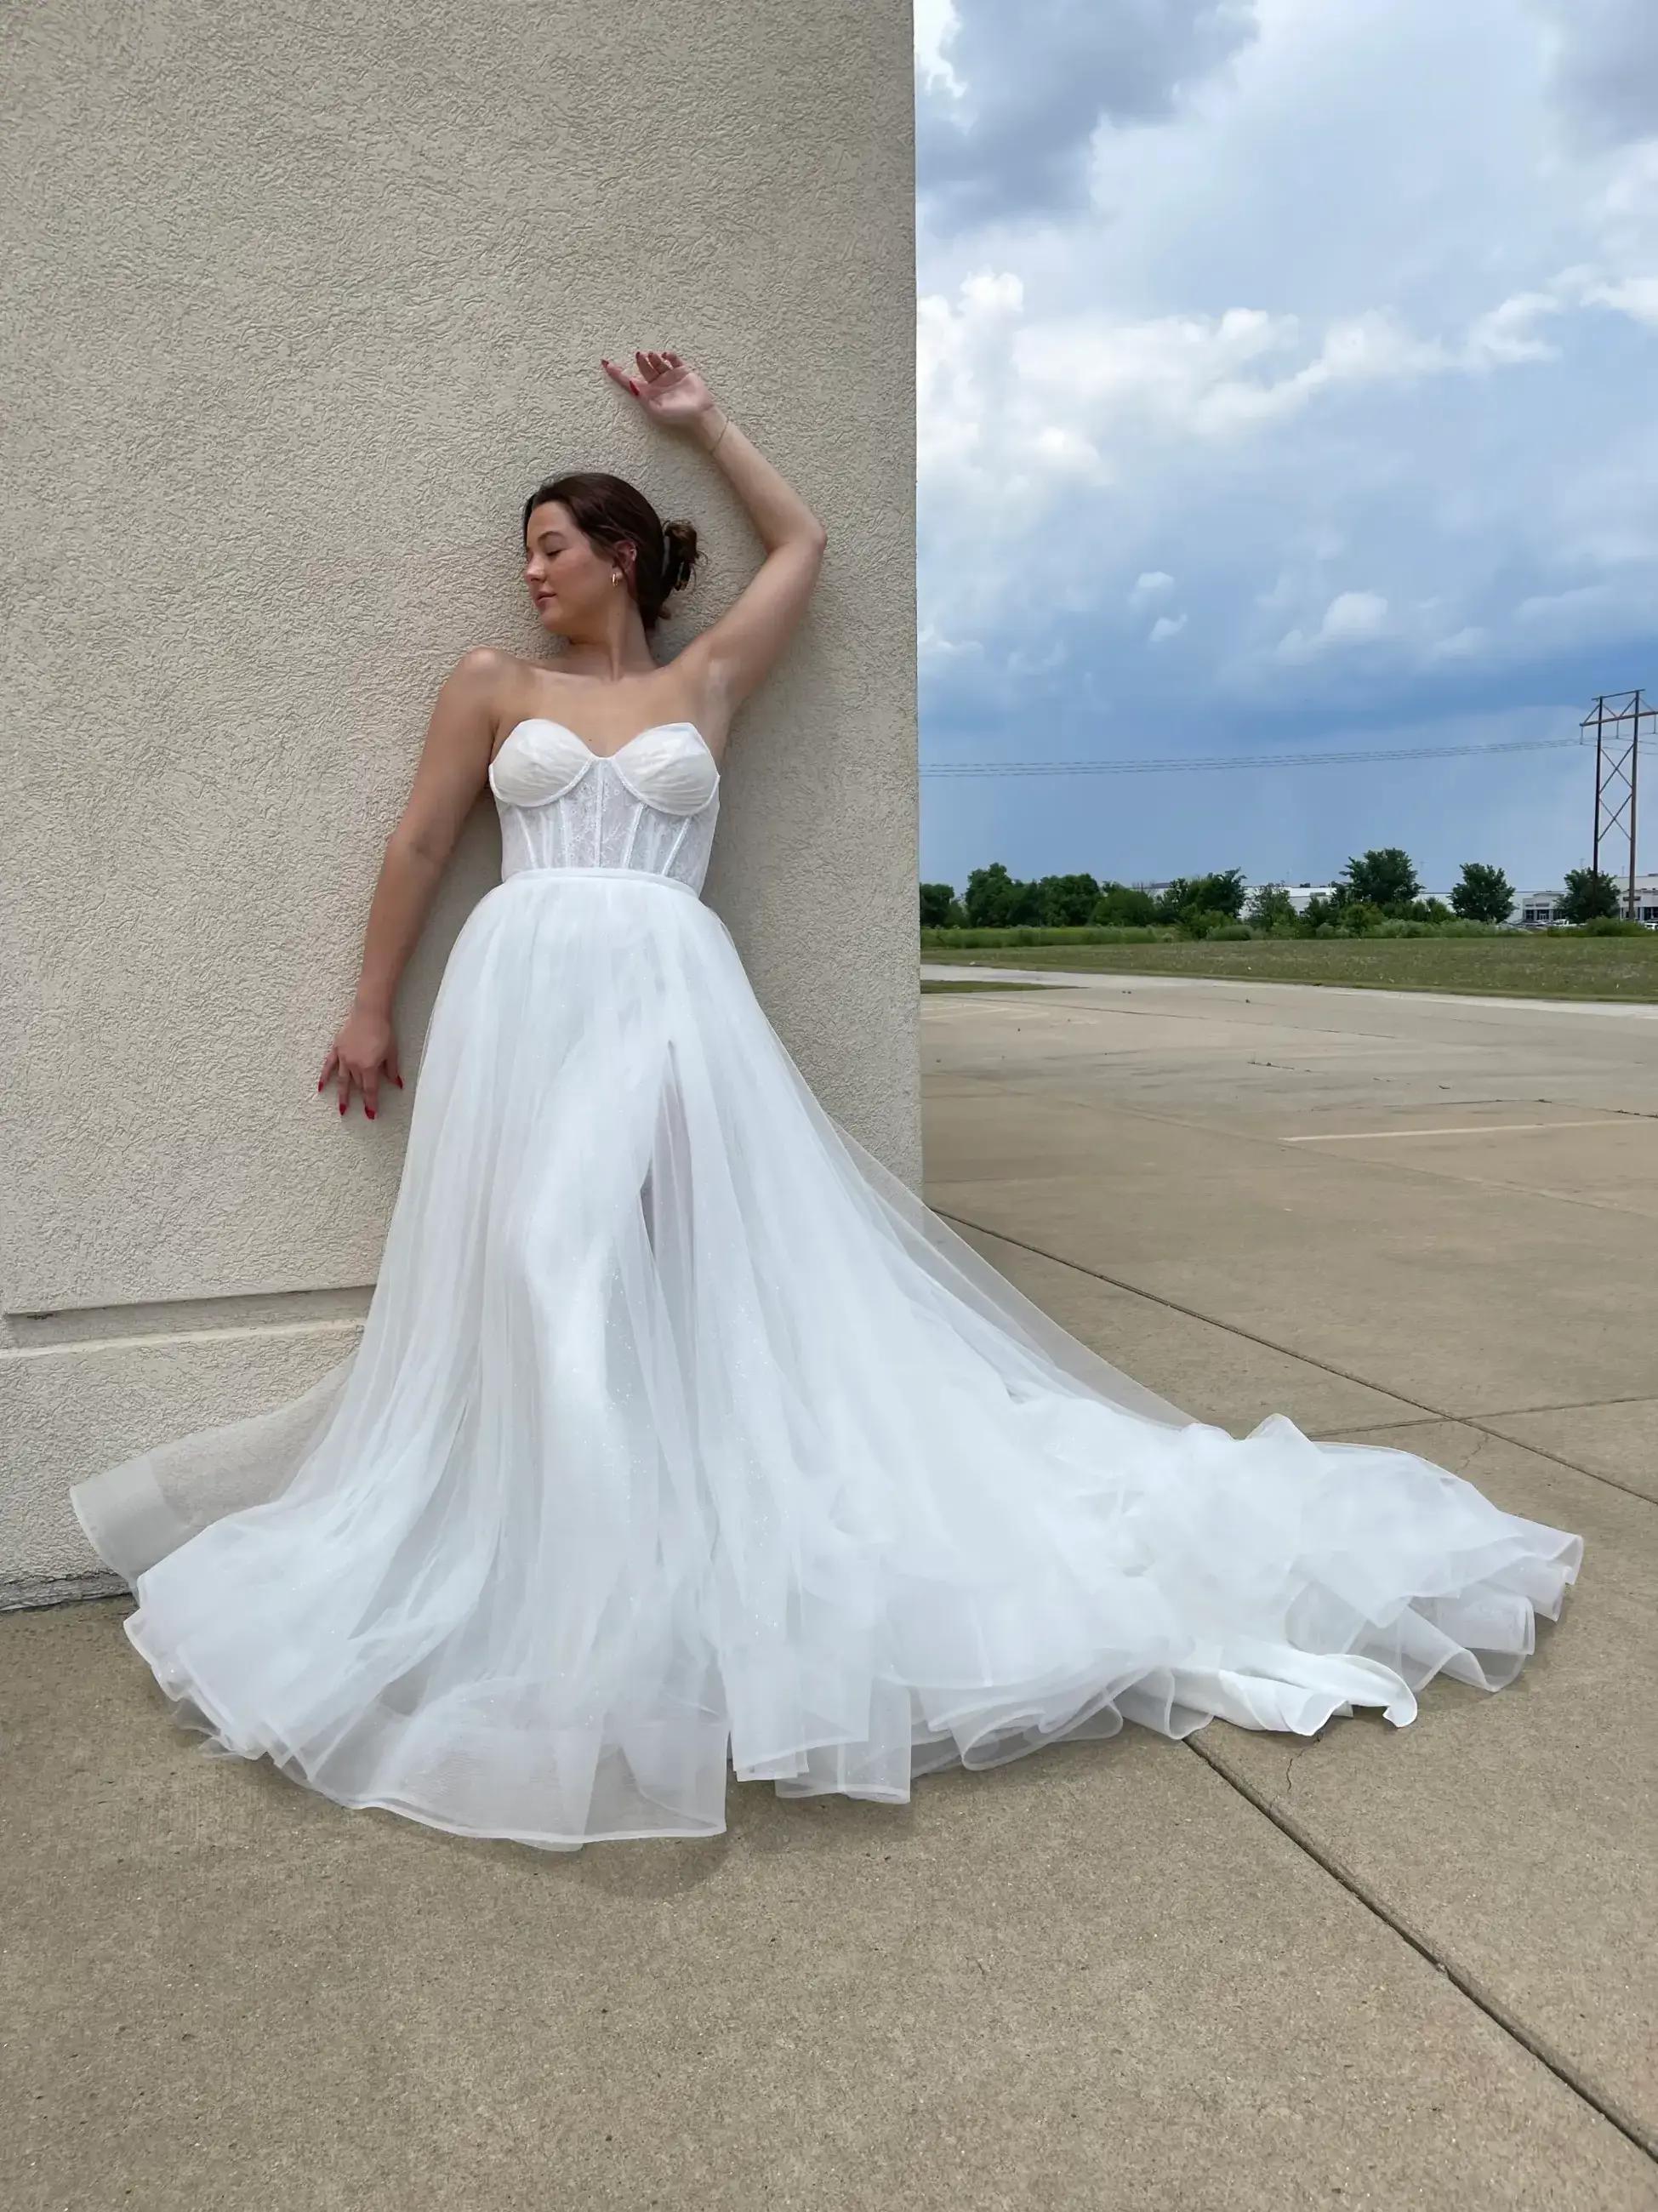 Finding Your Dream Gown with a Heart: The Michelle&#39;s Bridal Charity Event Image